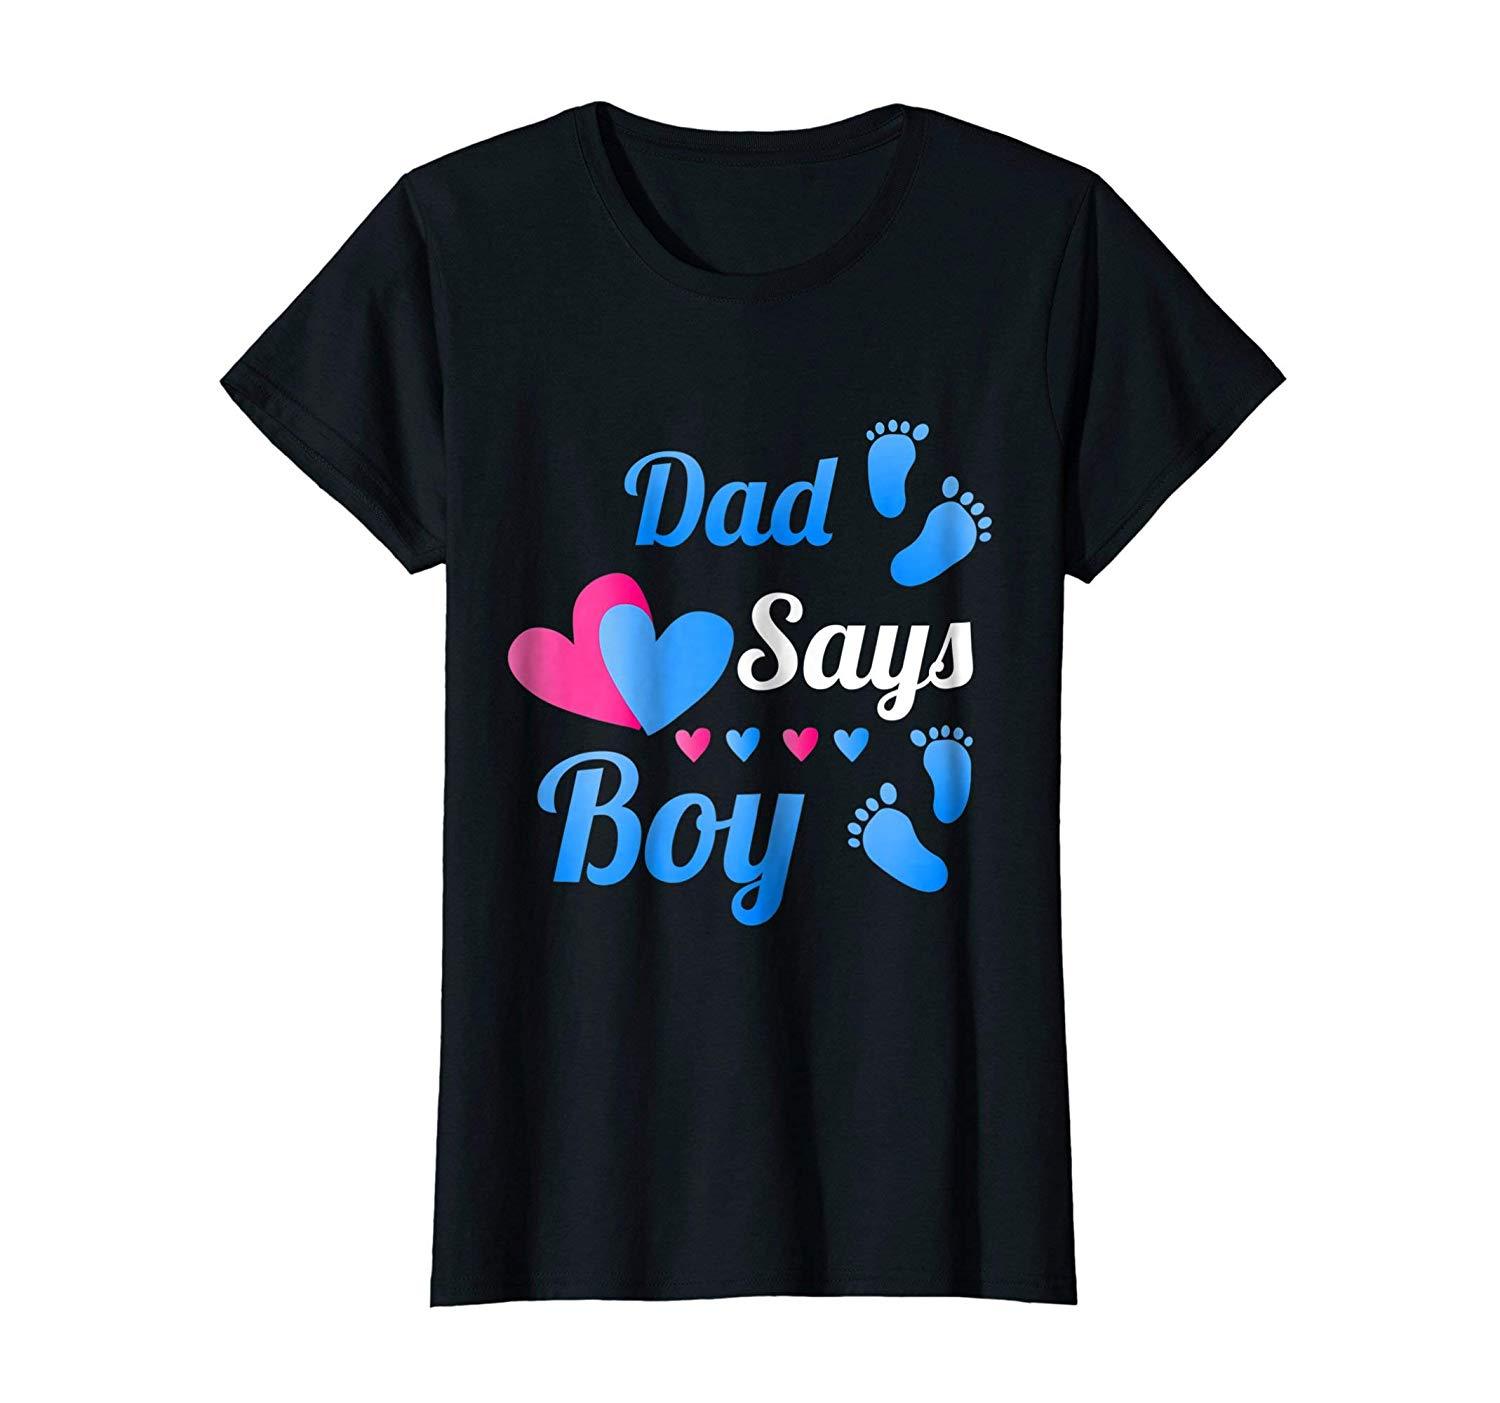 Funny Shirt - Gender Reveal | Dad Daddy Says and similar items